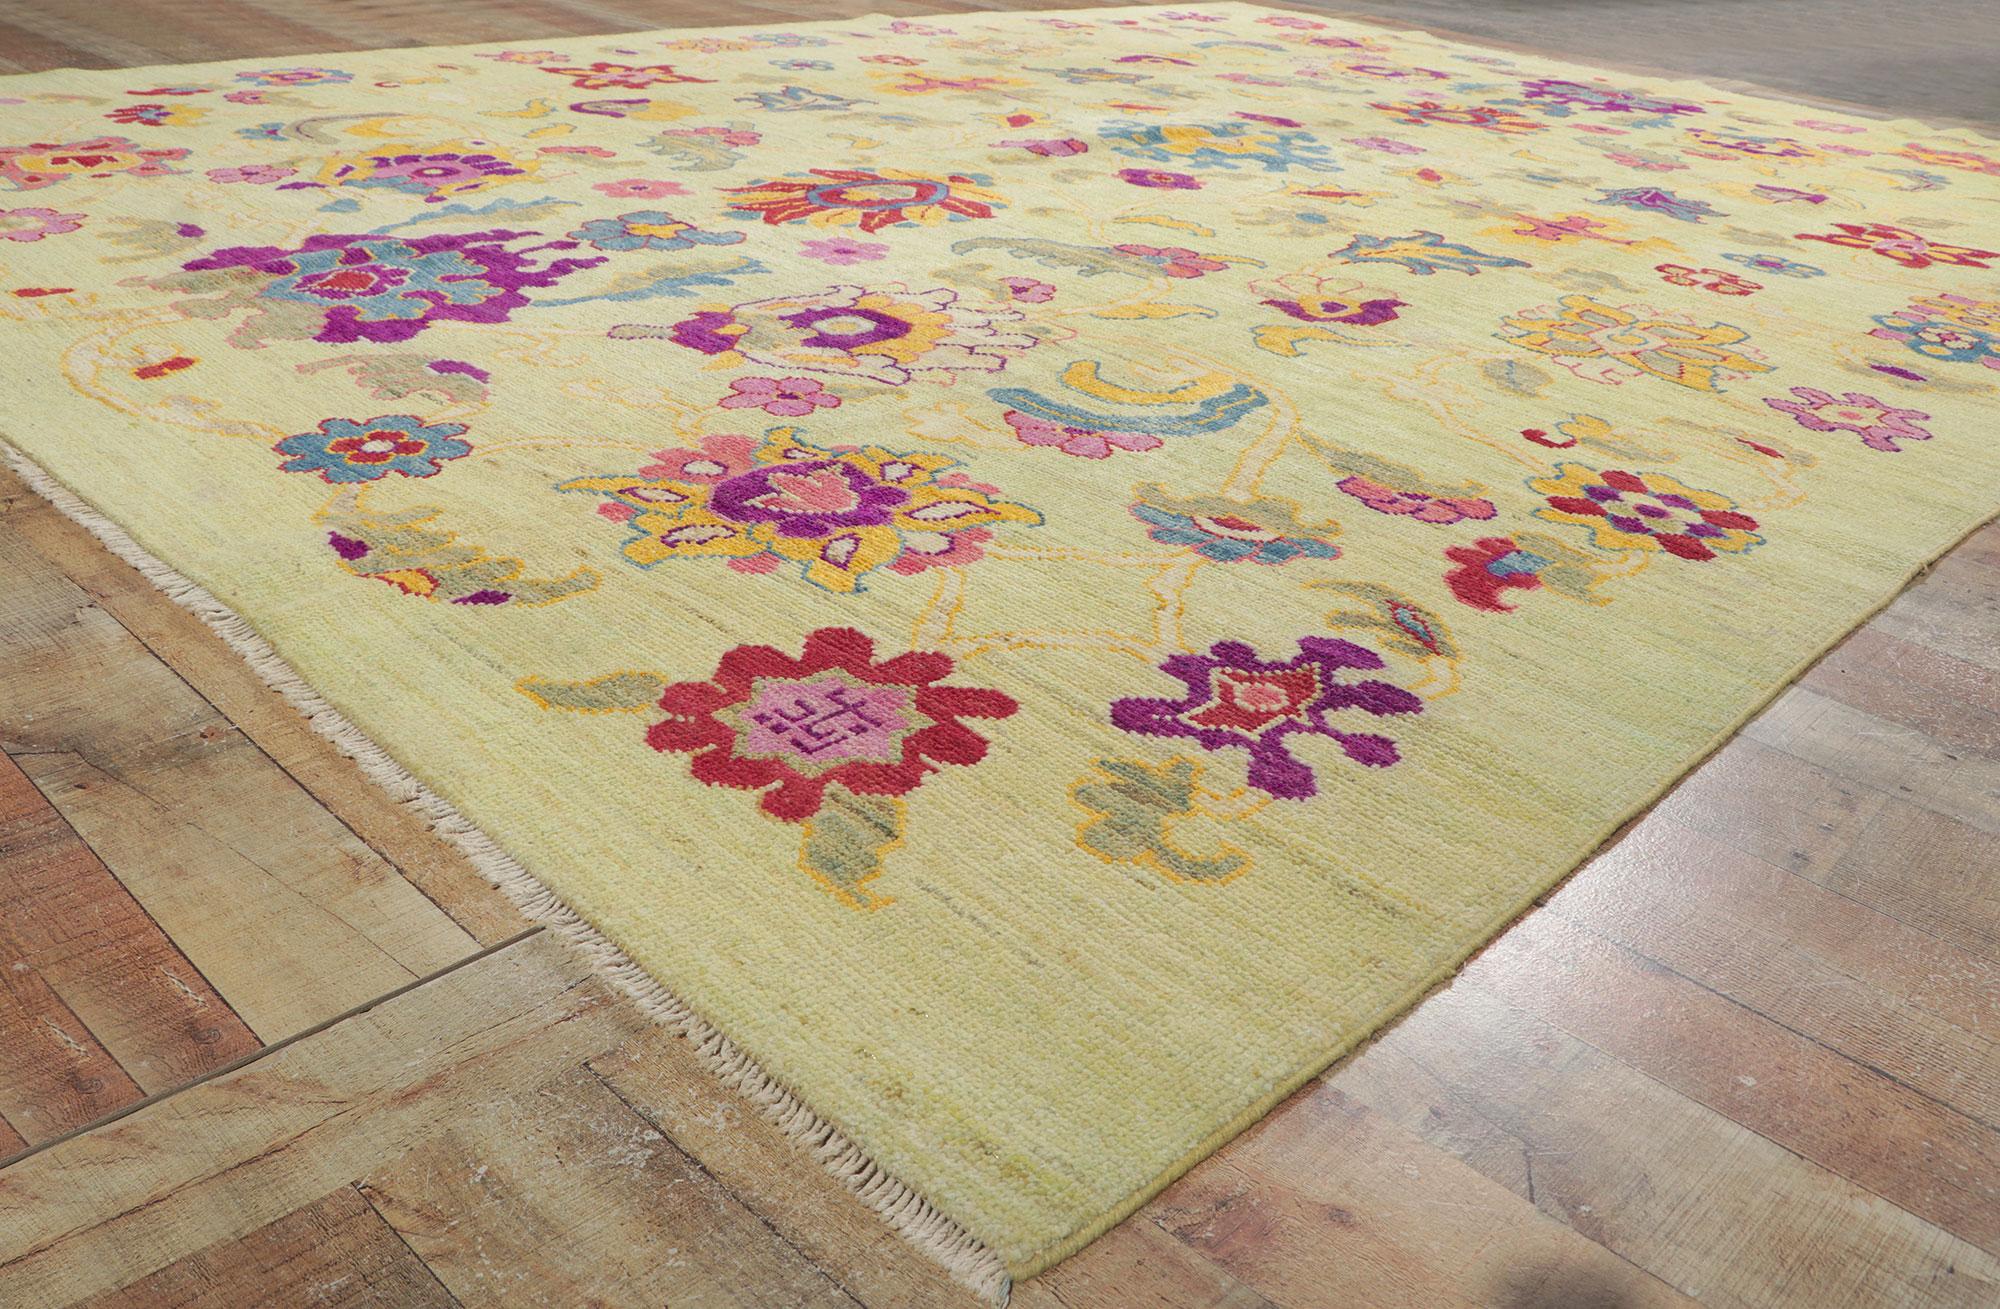 60658 New Colorful Turkish Oushak Rug, 10.06 x 14.02. Polished and playful with incredible detail and texture, this hand knotted wool colorful Turkish Oushak rug is a captivating vision of woven beauty. The bold design and vibrant colorway woven